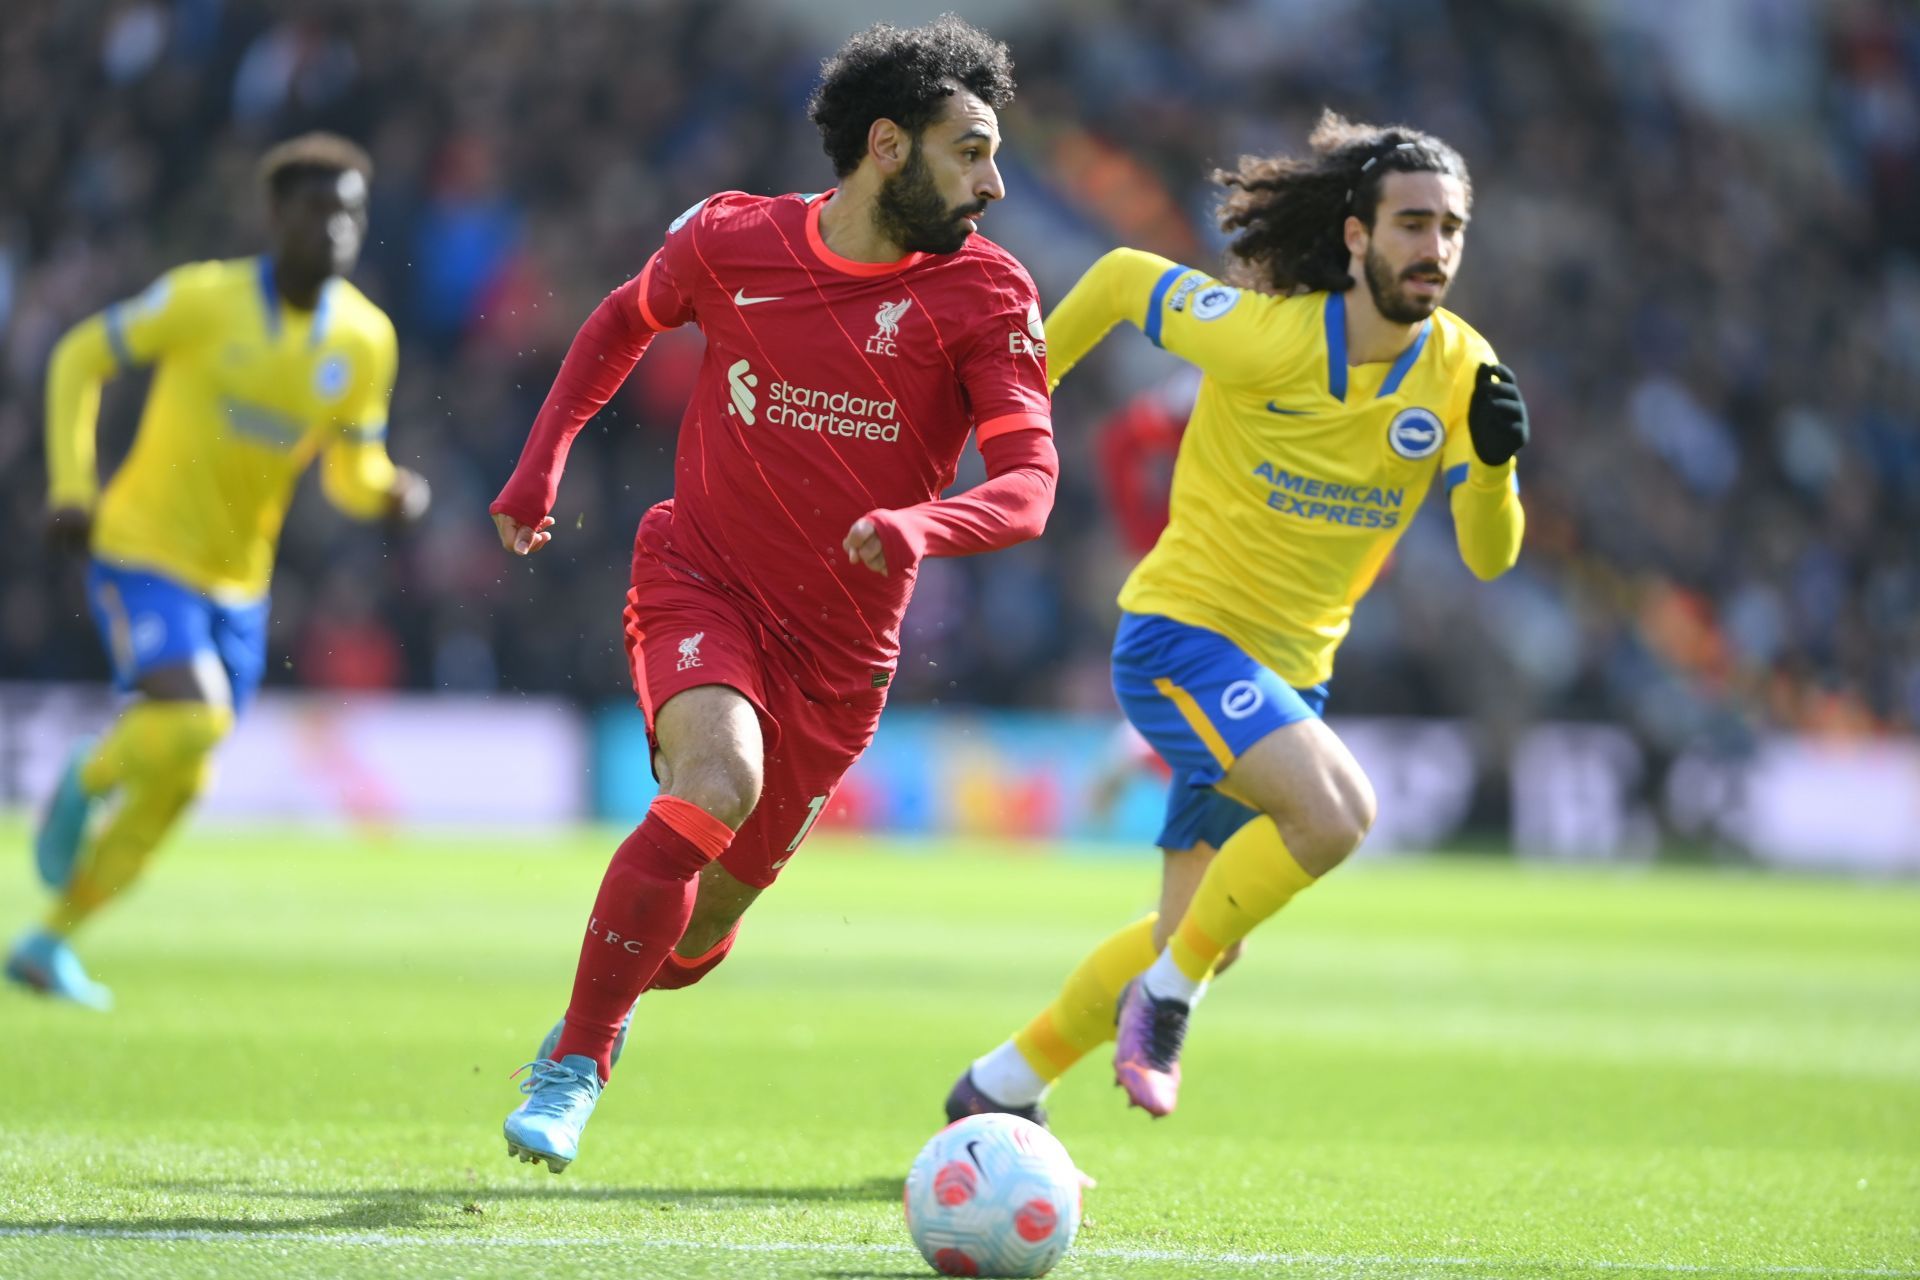 Mohamed Salah had a great game